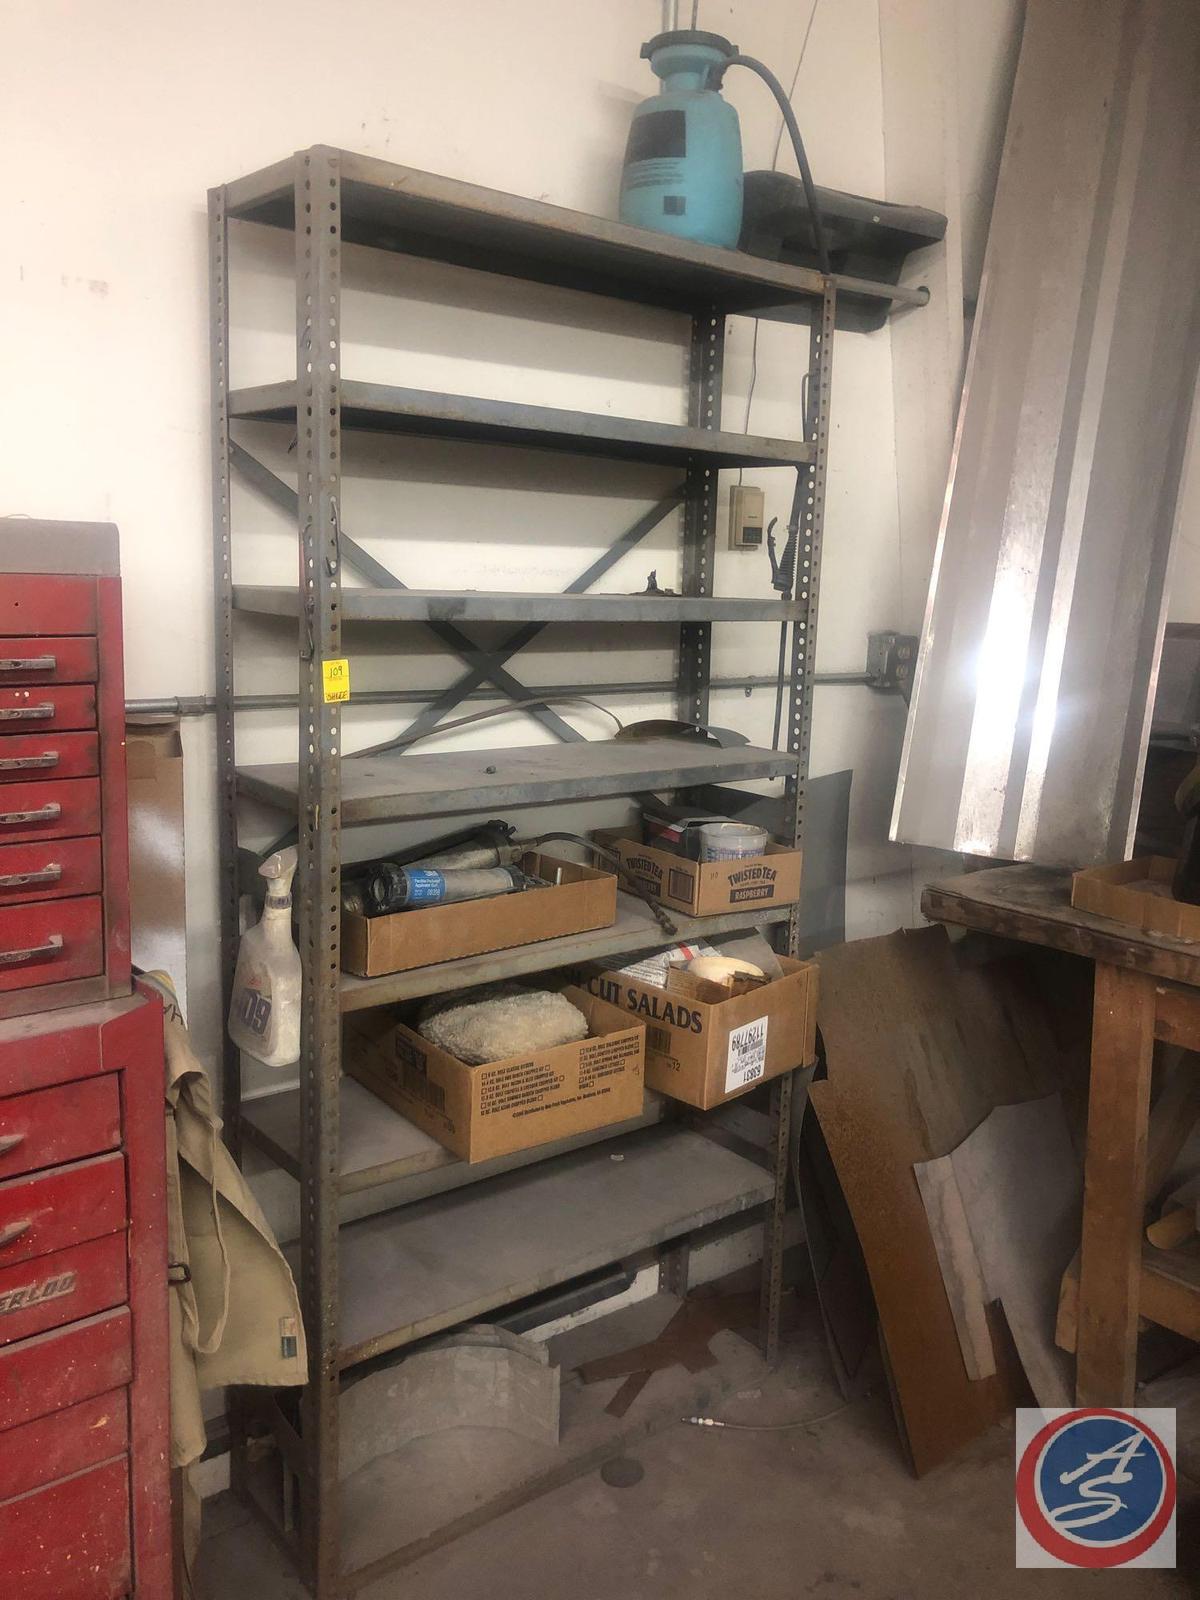 Metal Eight Tier Shelving Unit Measuring 36" X 12" X 75" and Contents Including 3M Flexible Package